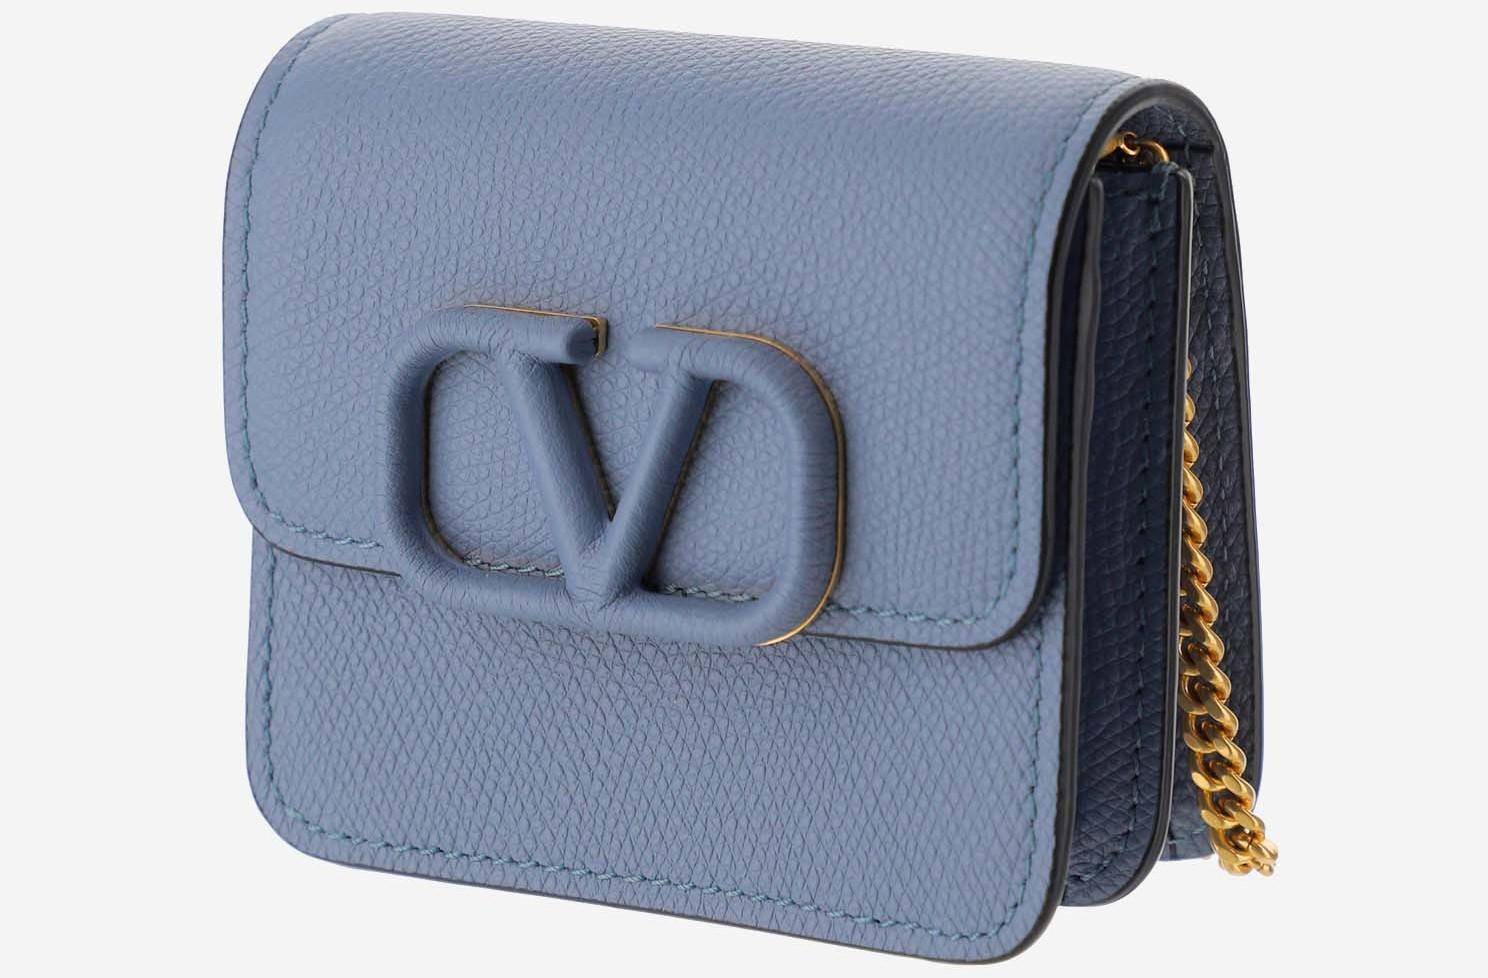 Valentino VLogo Signature Grainy Calfskin Wallet With Chain